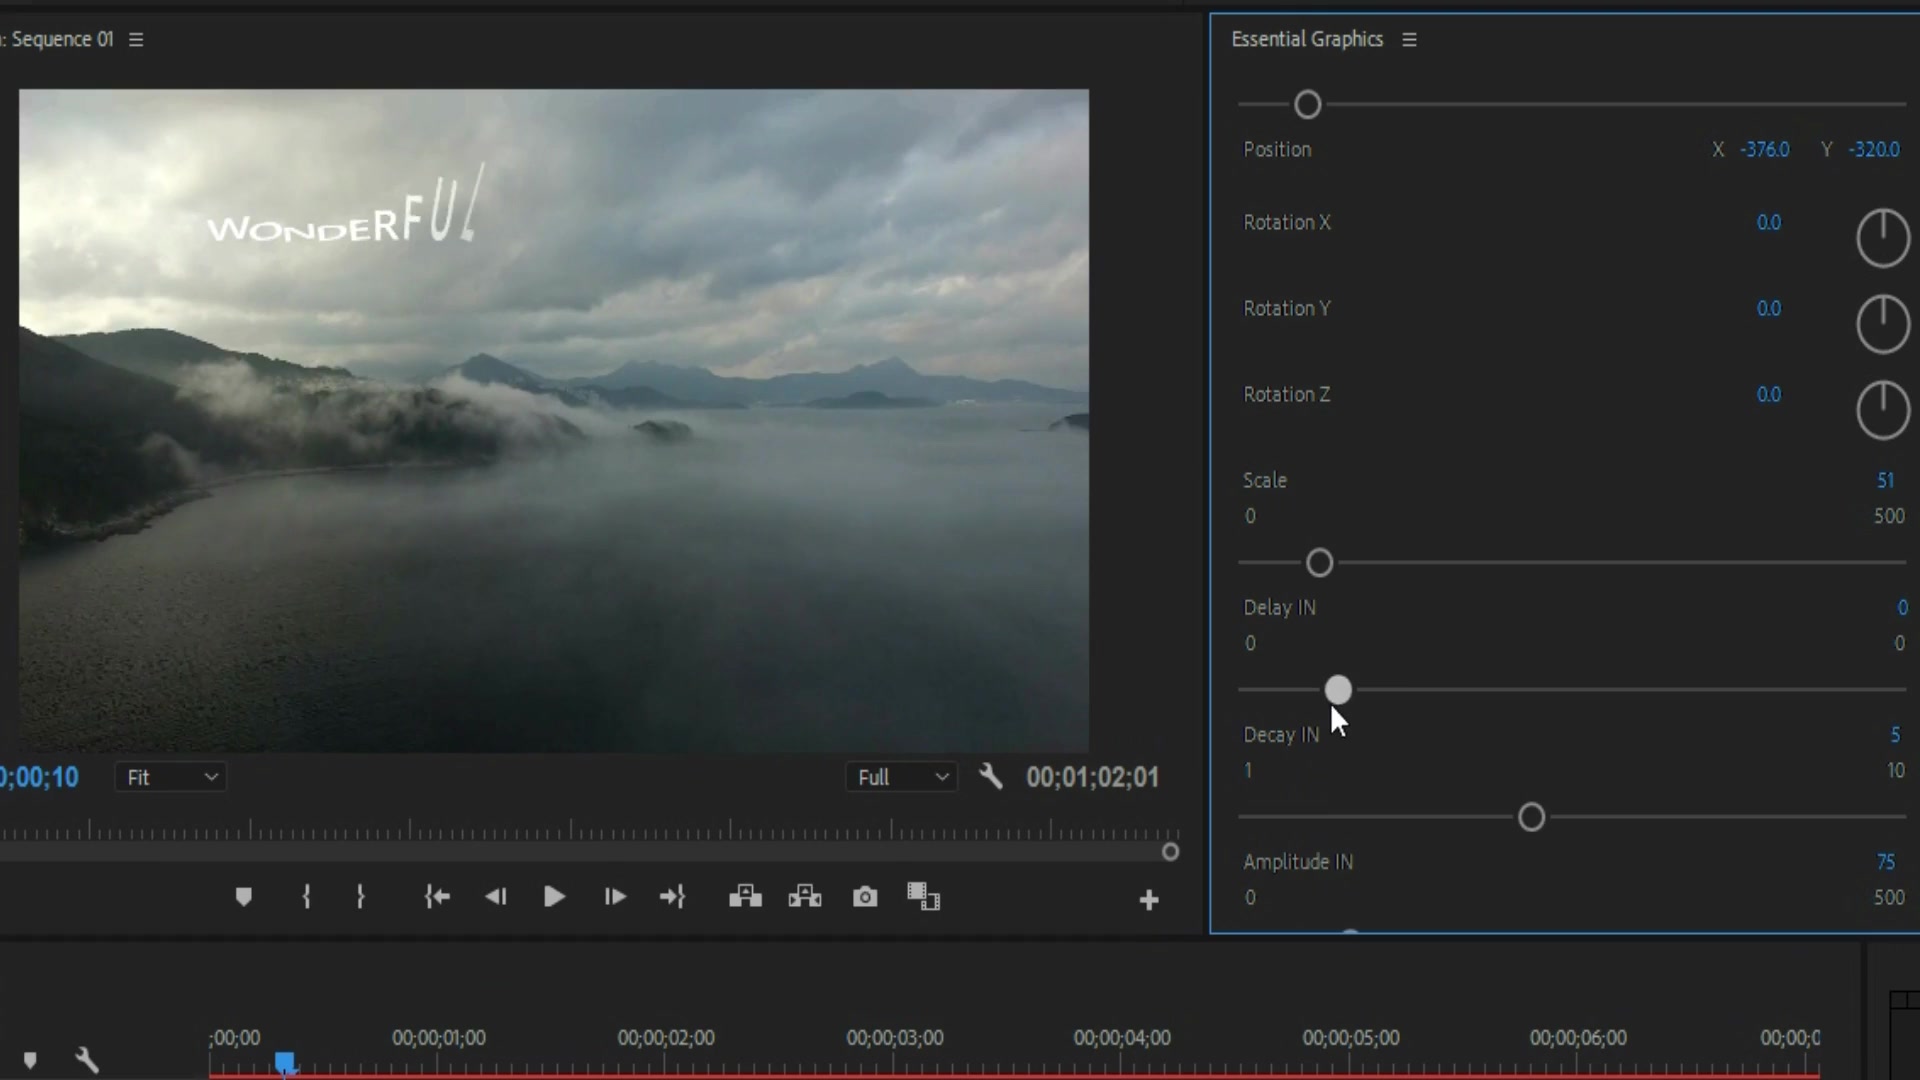 700 Text Presets for Premiere Pro & After effects - Download Videohive 22508370